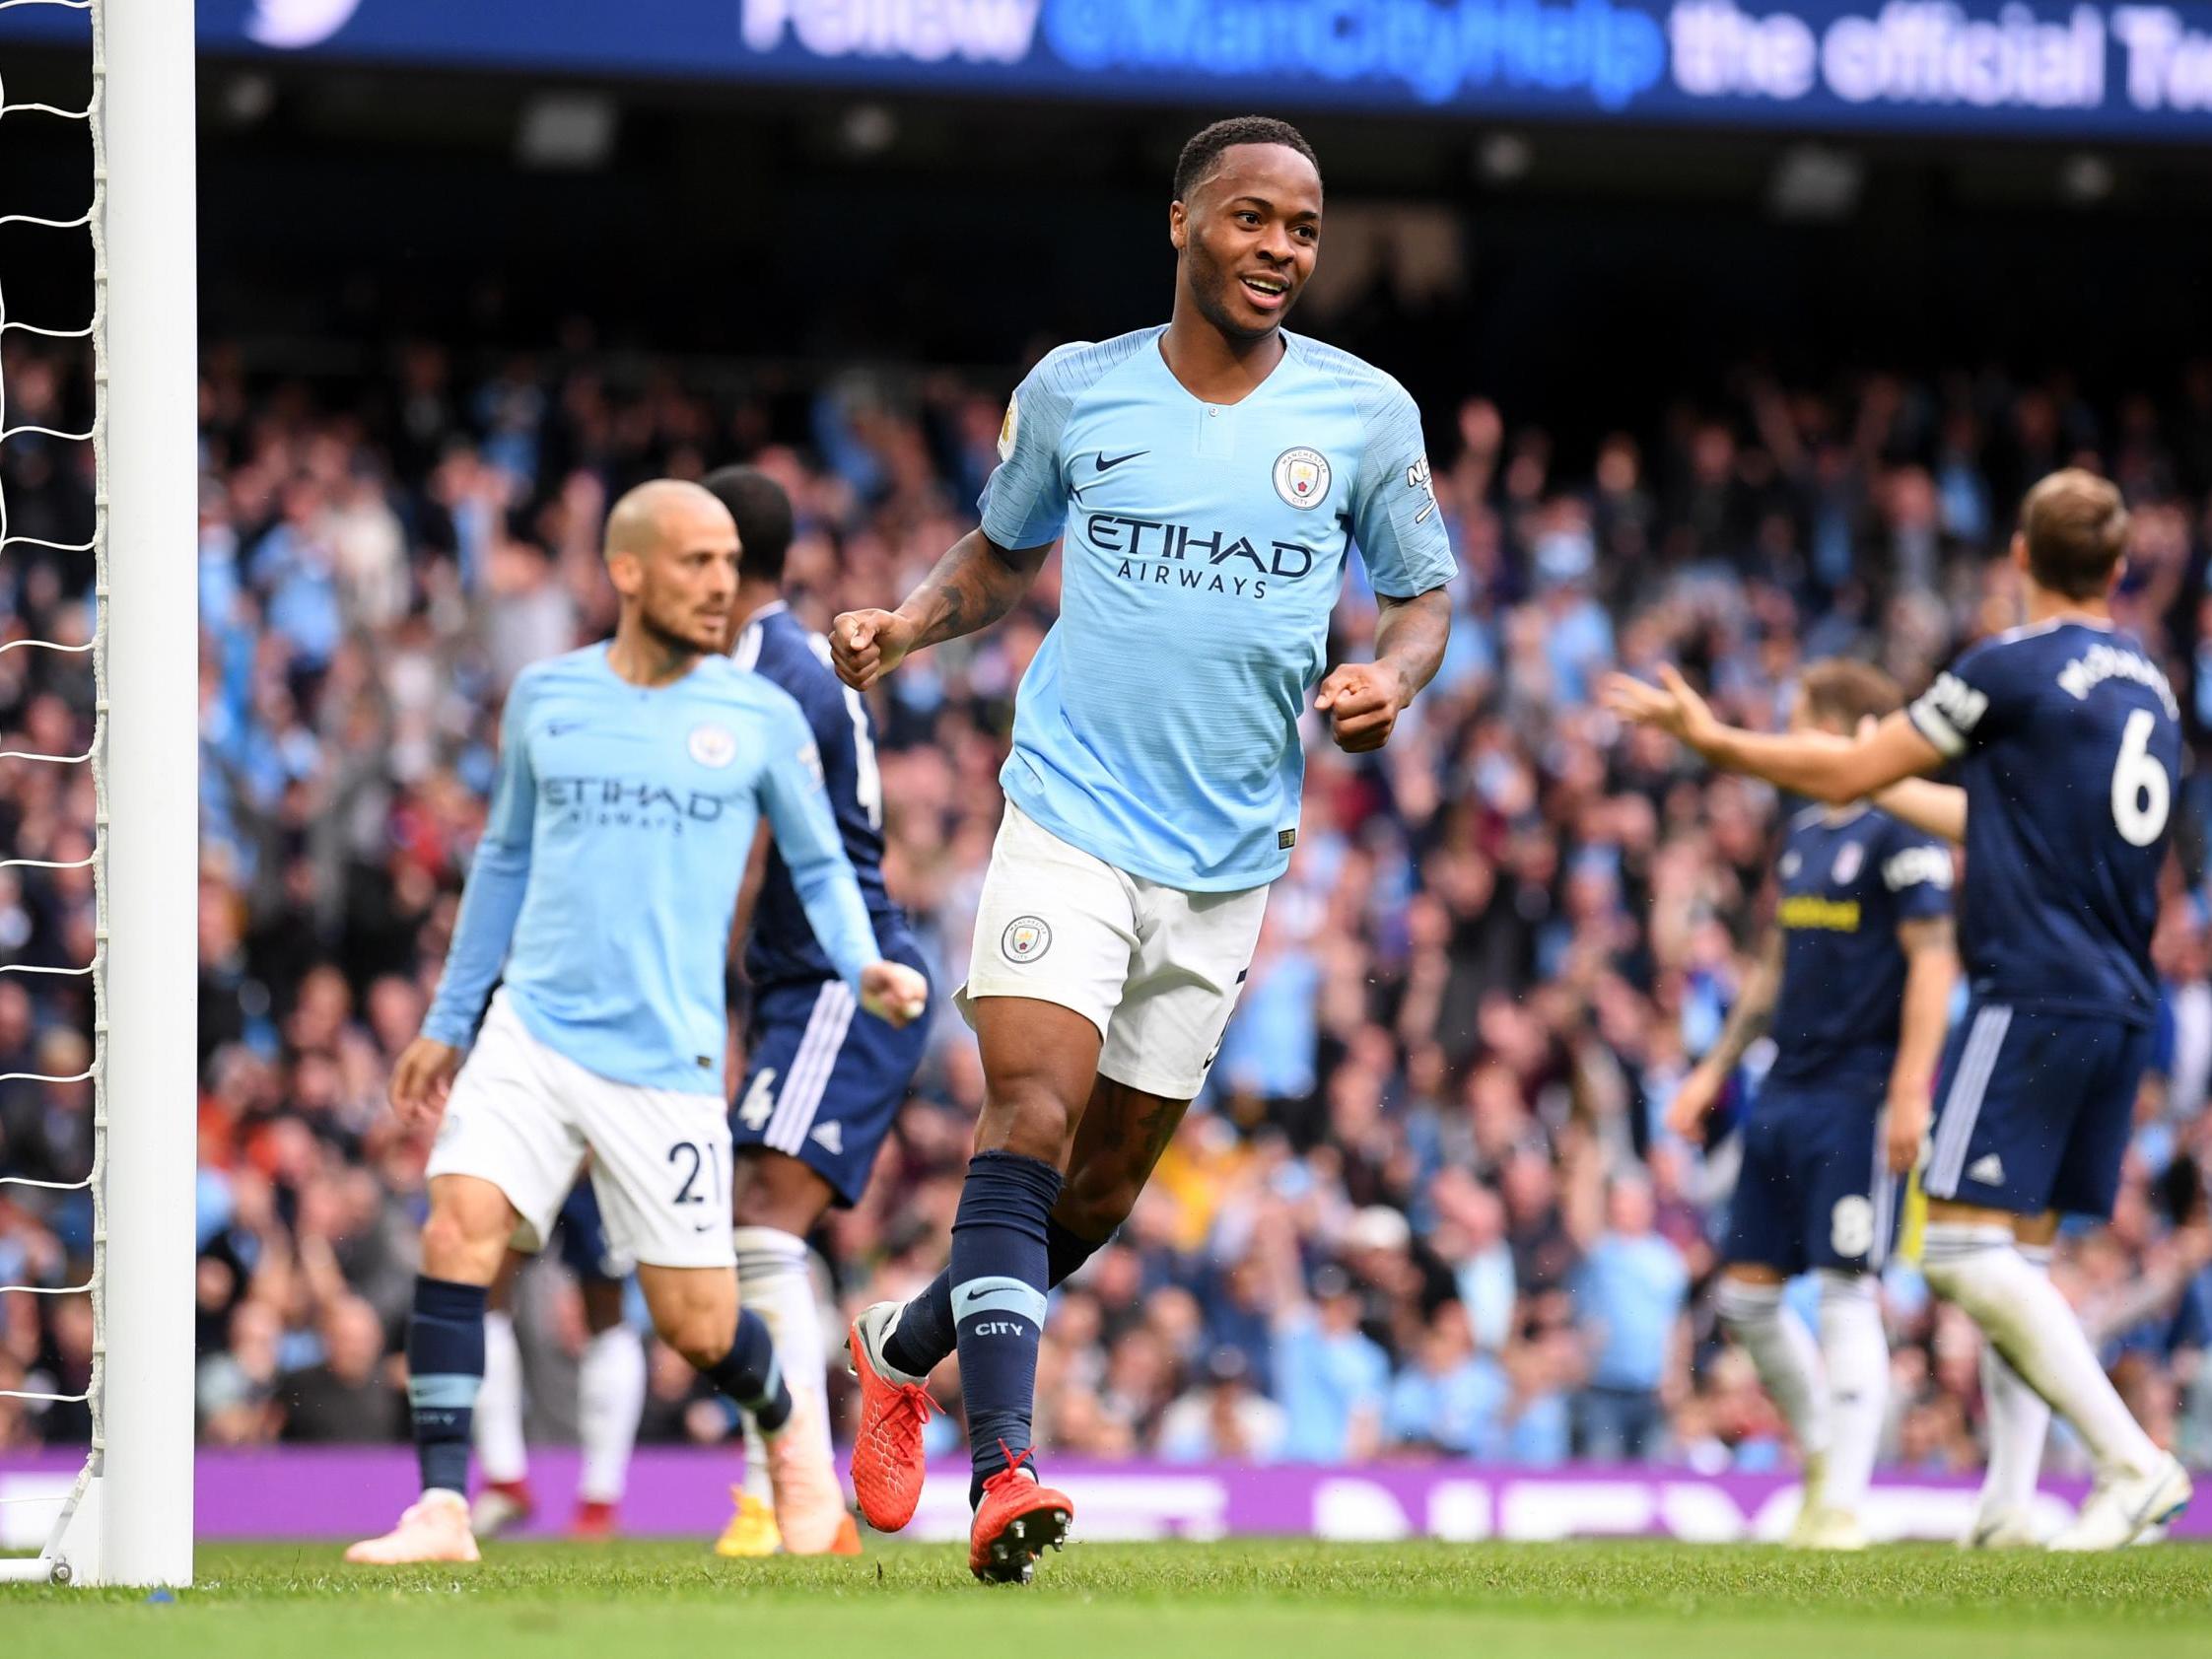 Manchester City have been patient with Sterling – time for England to follow suit